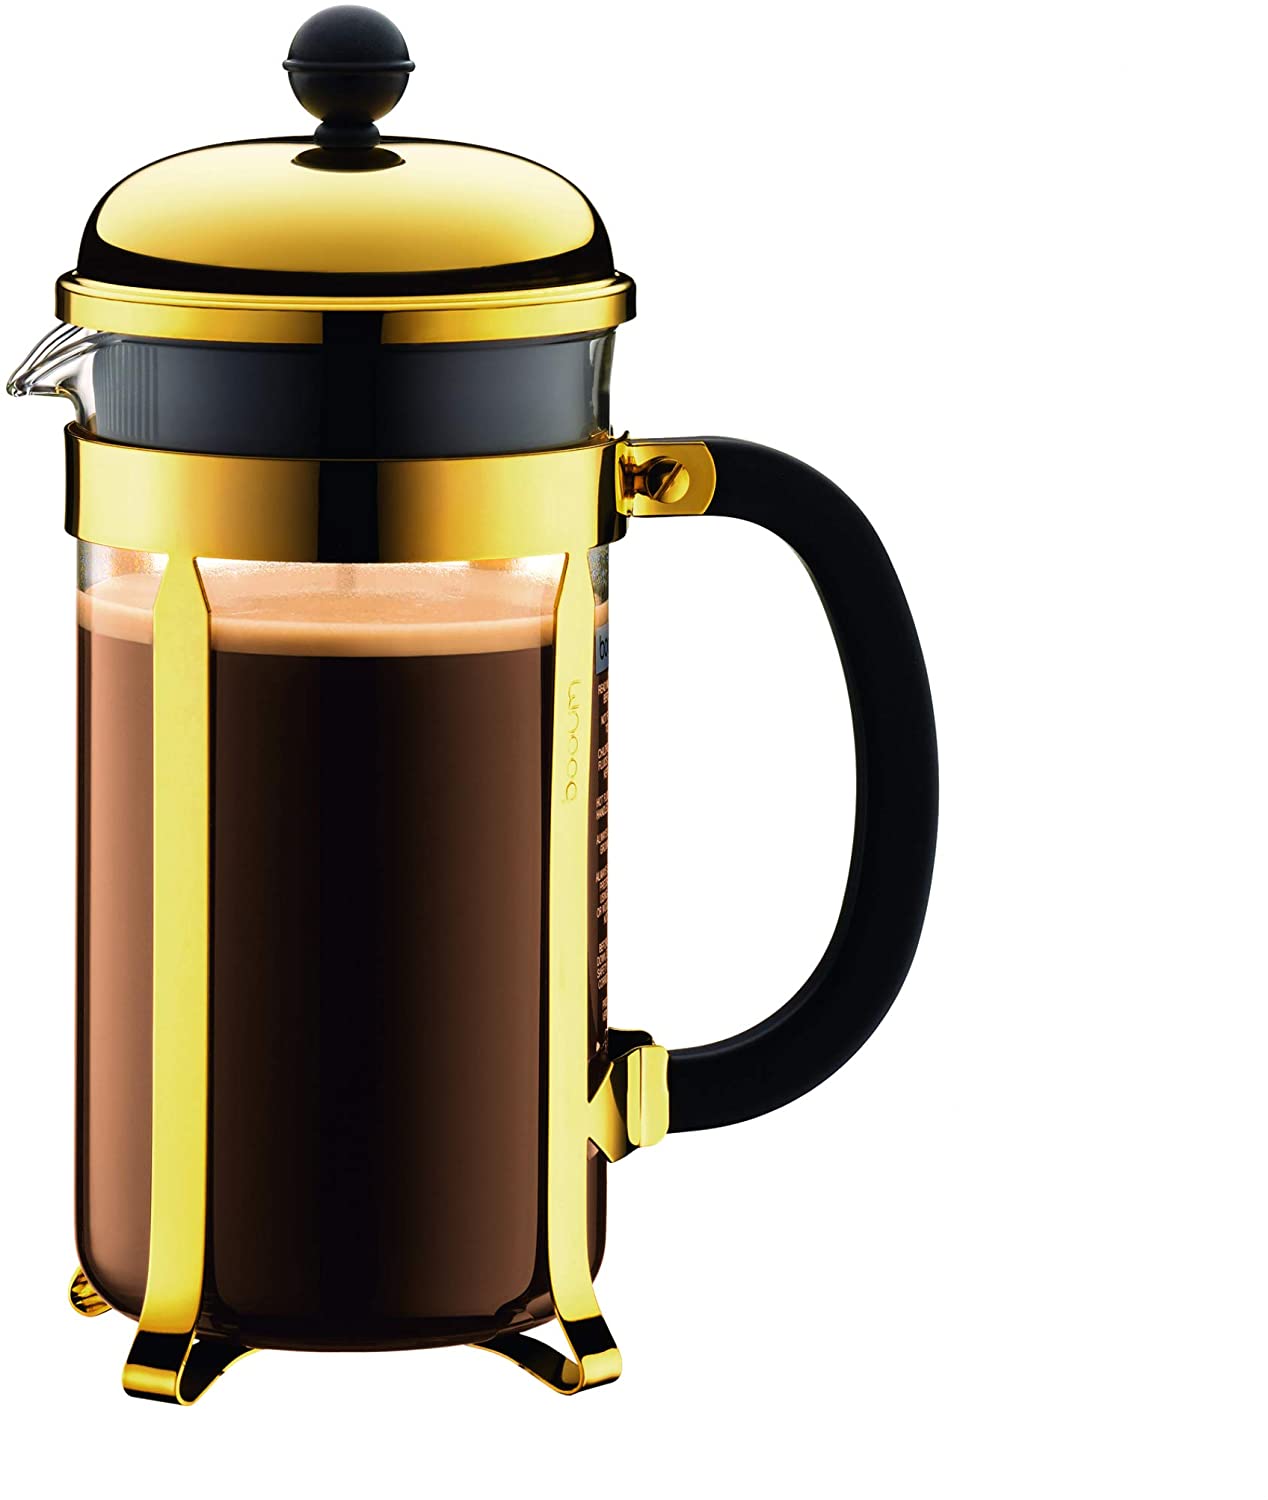 Bodum 1928-17 Chambord Coffee Maker 8 Cups with Metal Frame, Stainless Steel, Gold, 24 x 50 x 27.2 cm